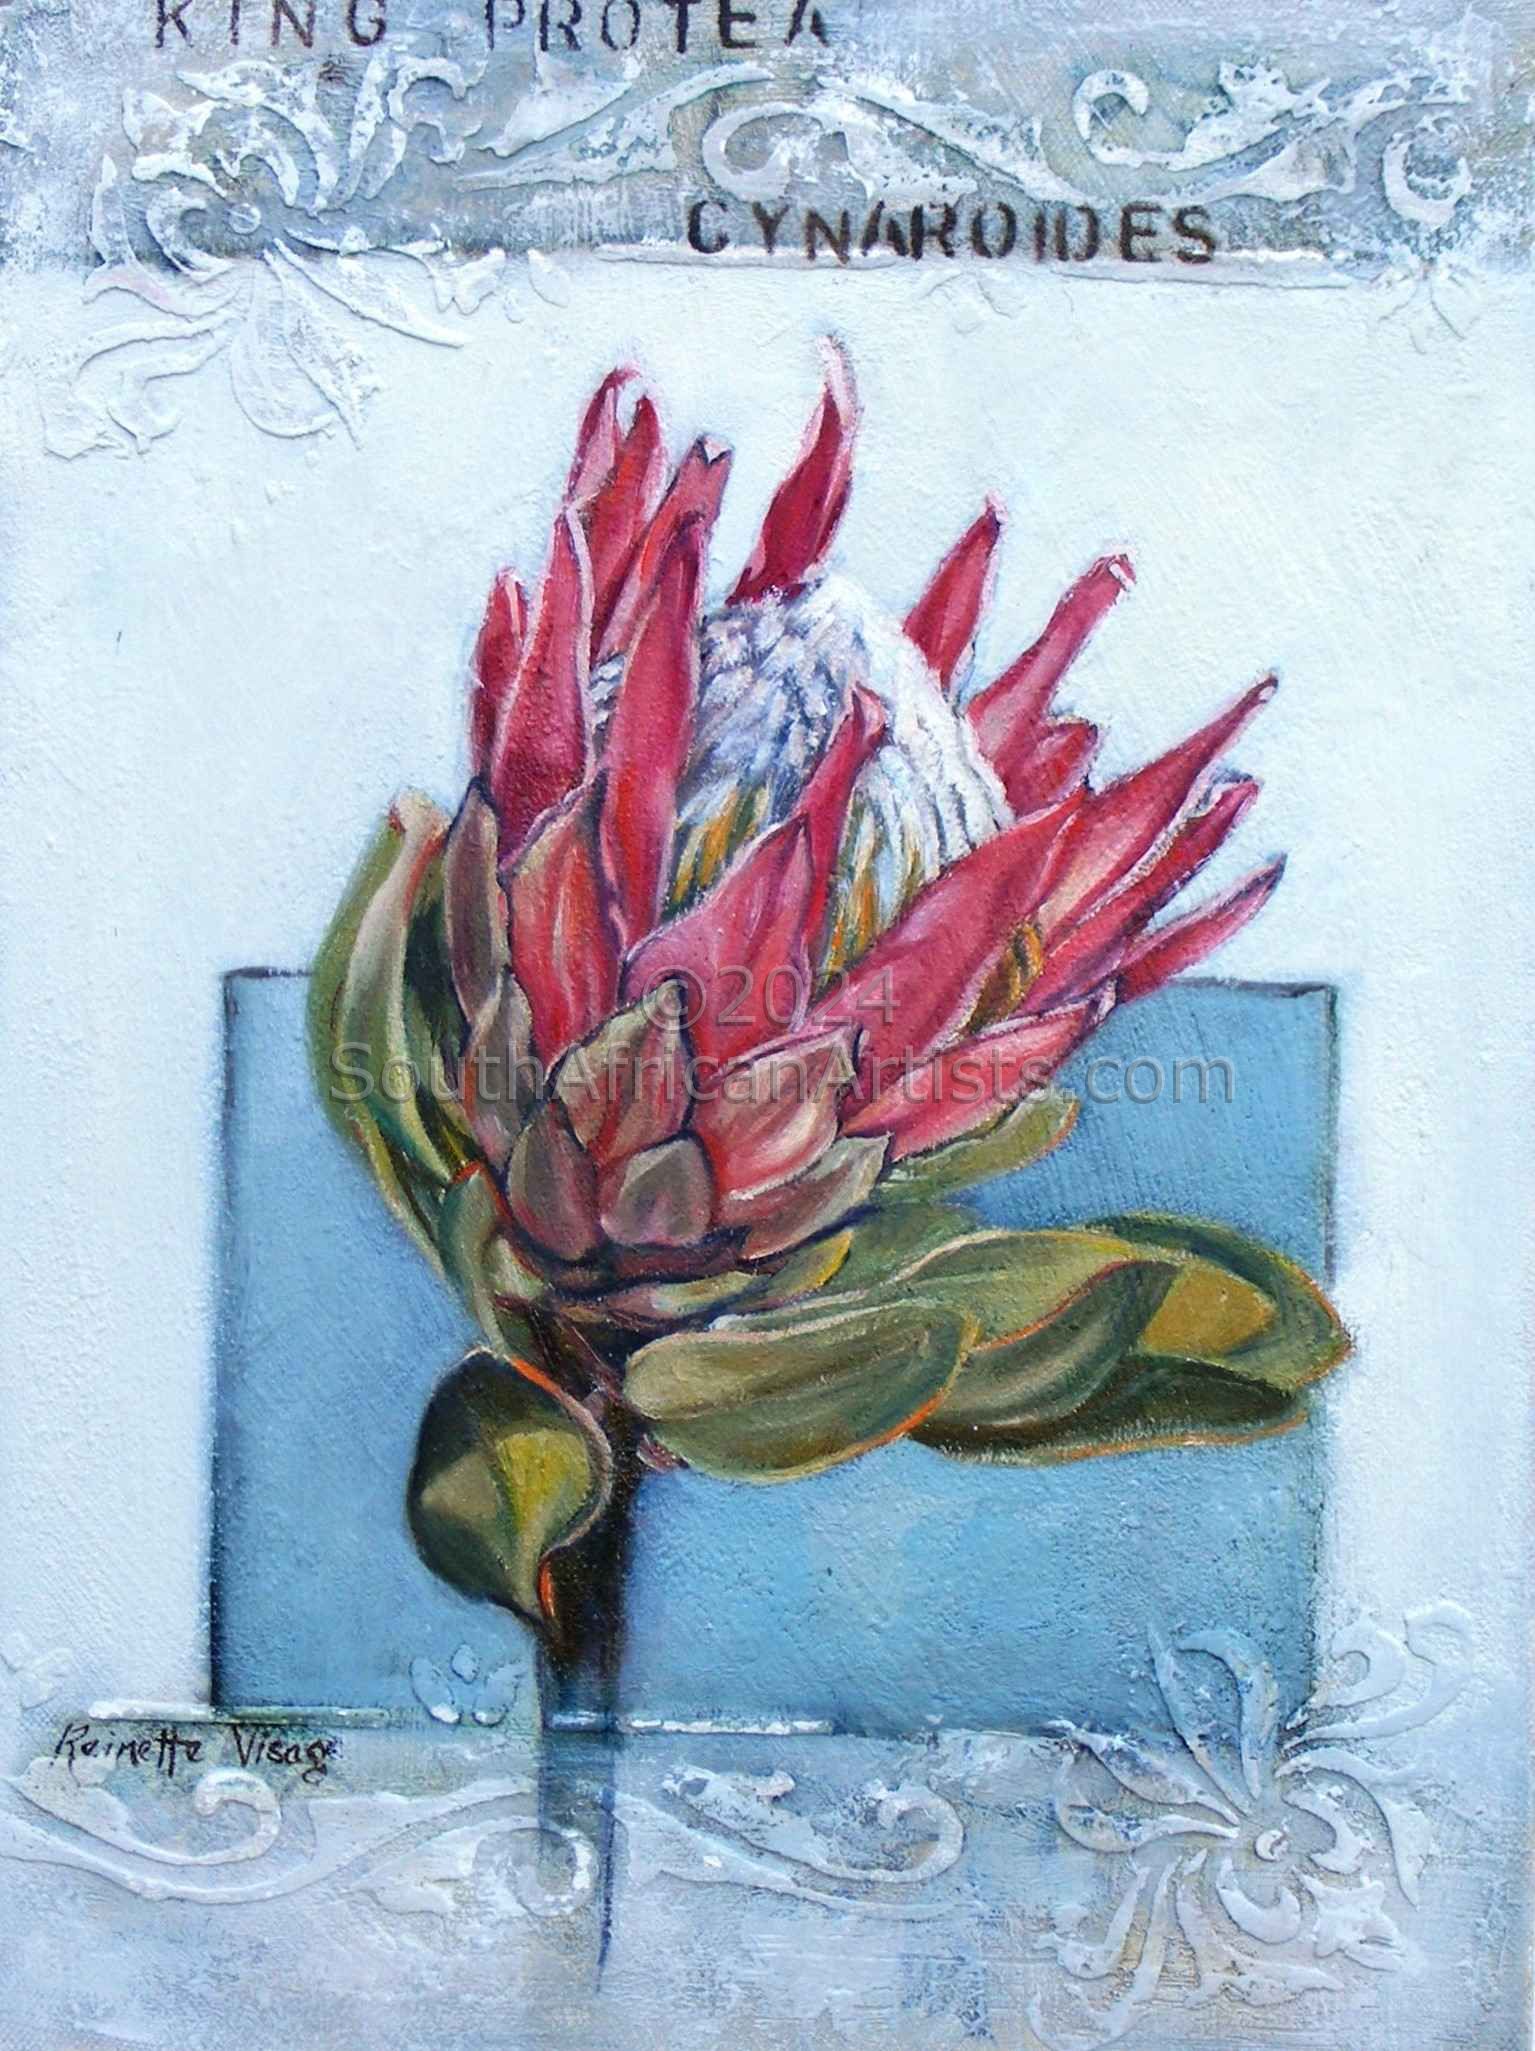 One Pink Protea